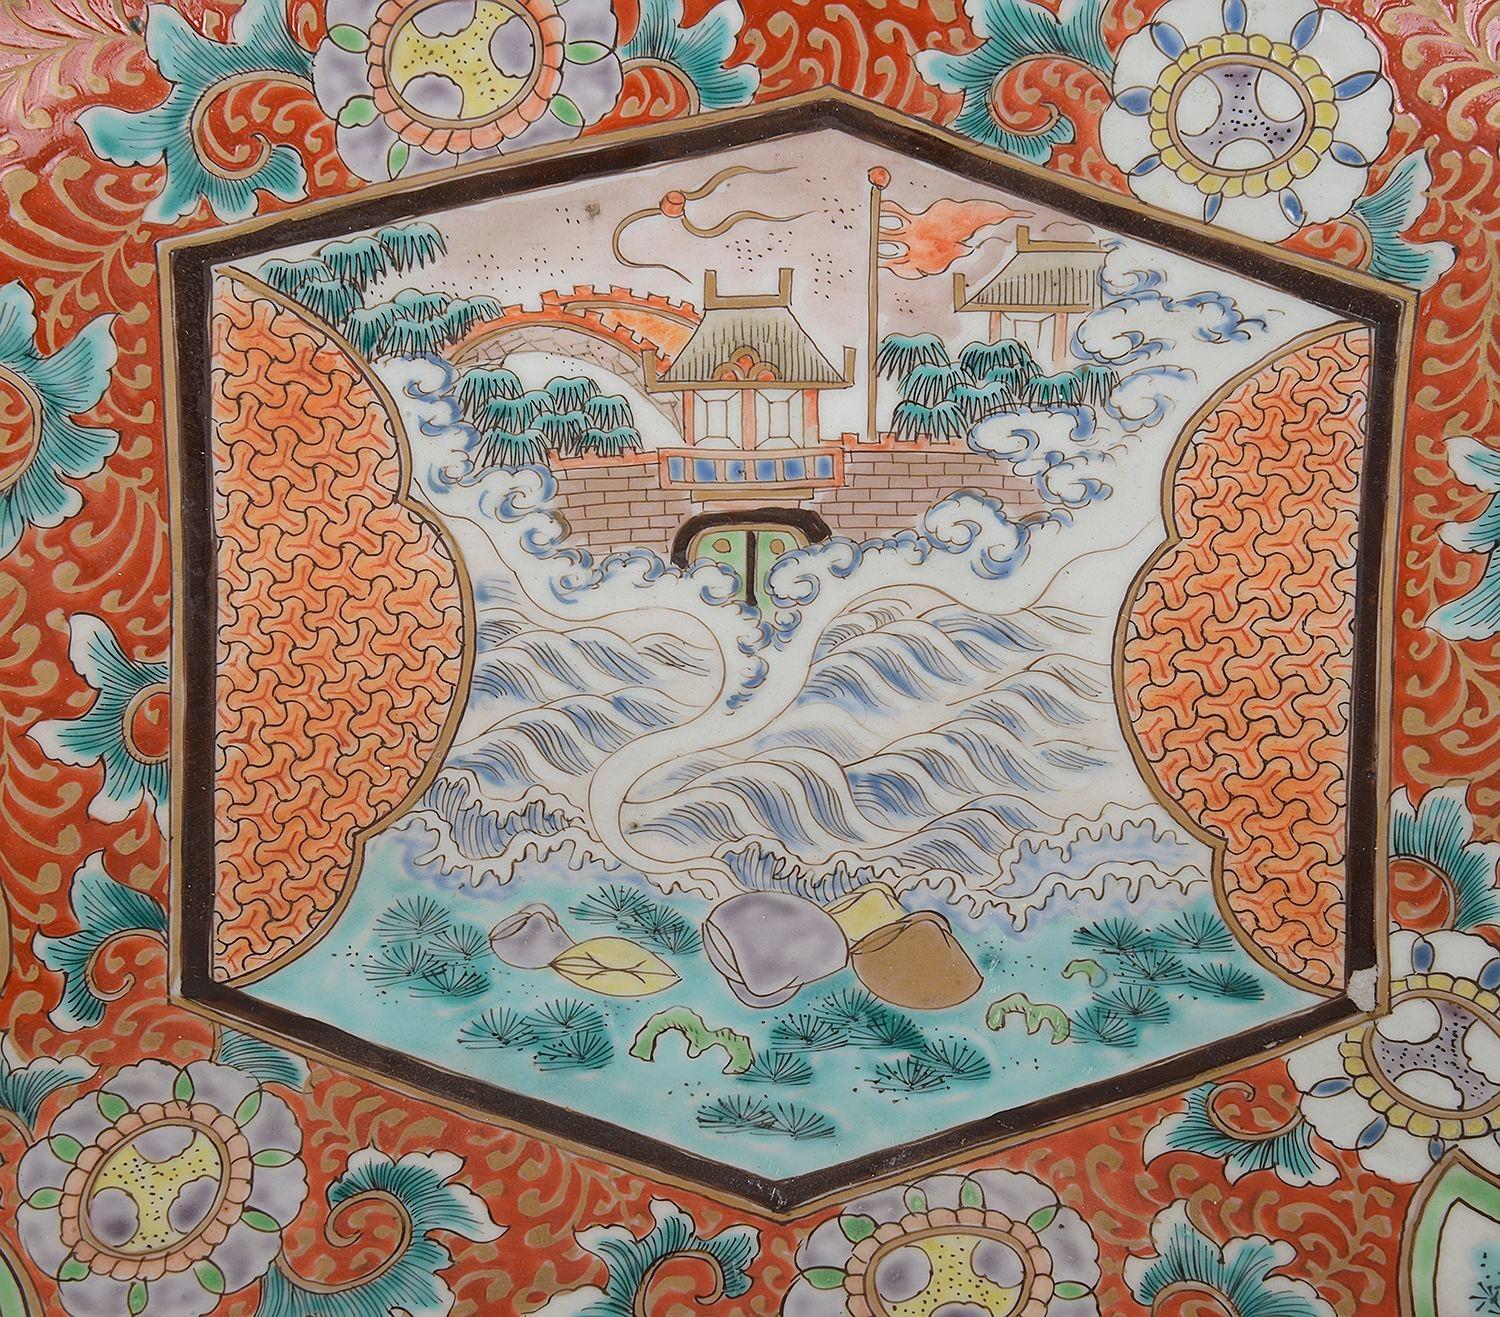 A large late 19th Century Japanese Imari porcelain circular charger, having wonderful bold orange colouring to the ground, with scrolling foliate decoration, inset hand painted panels depicting Pagoda buildings, waves, and birds flying among blossom